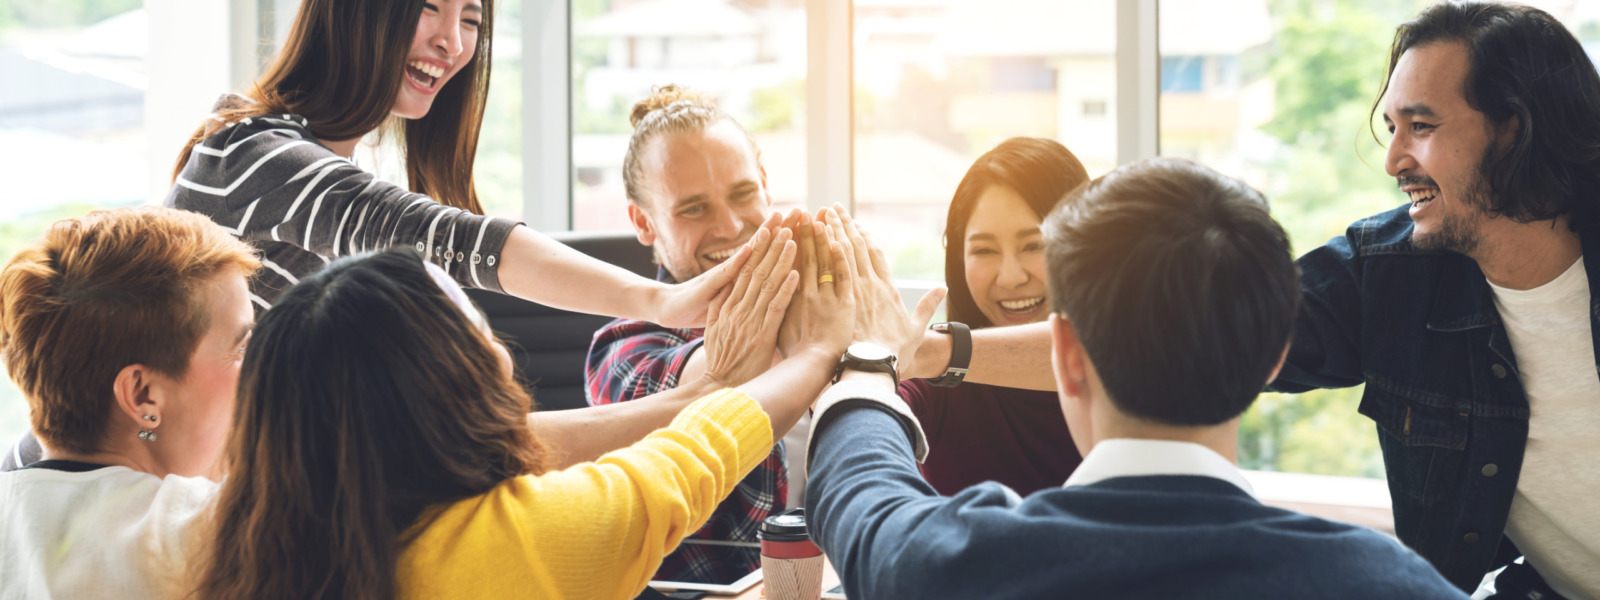 3 Ways to Motivate Employees Going Into the New Year